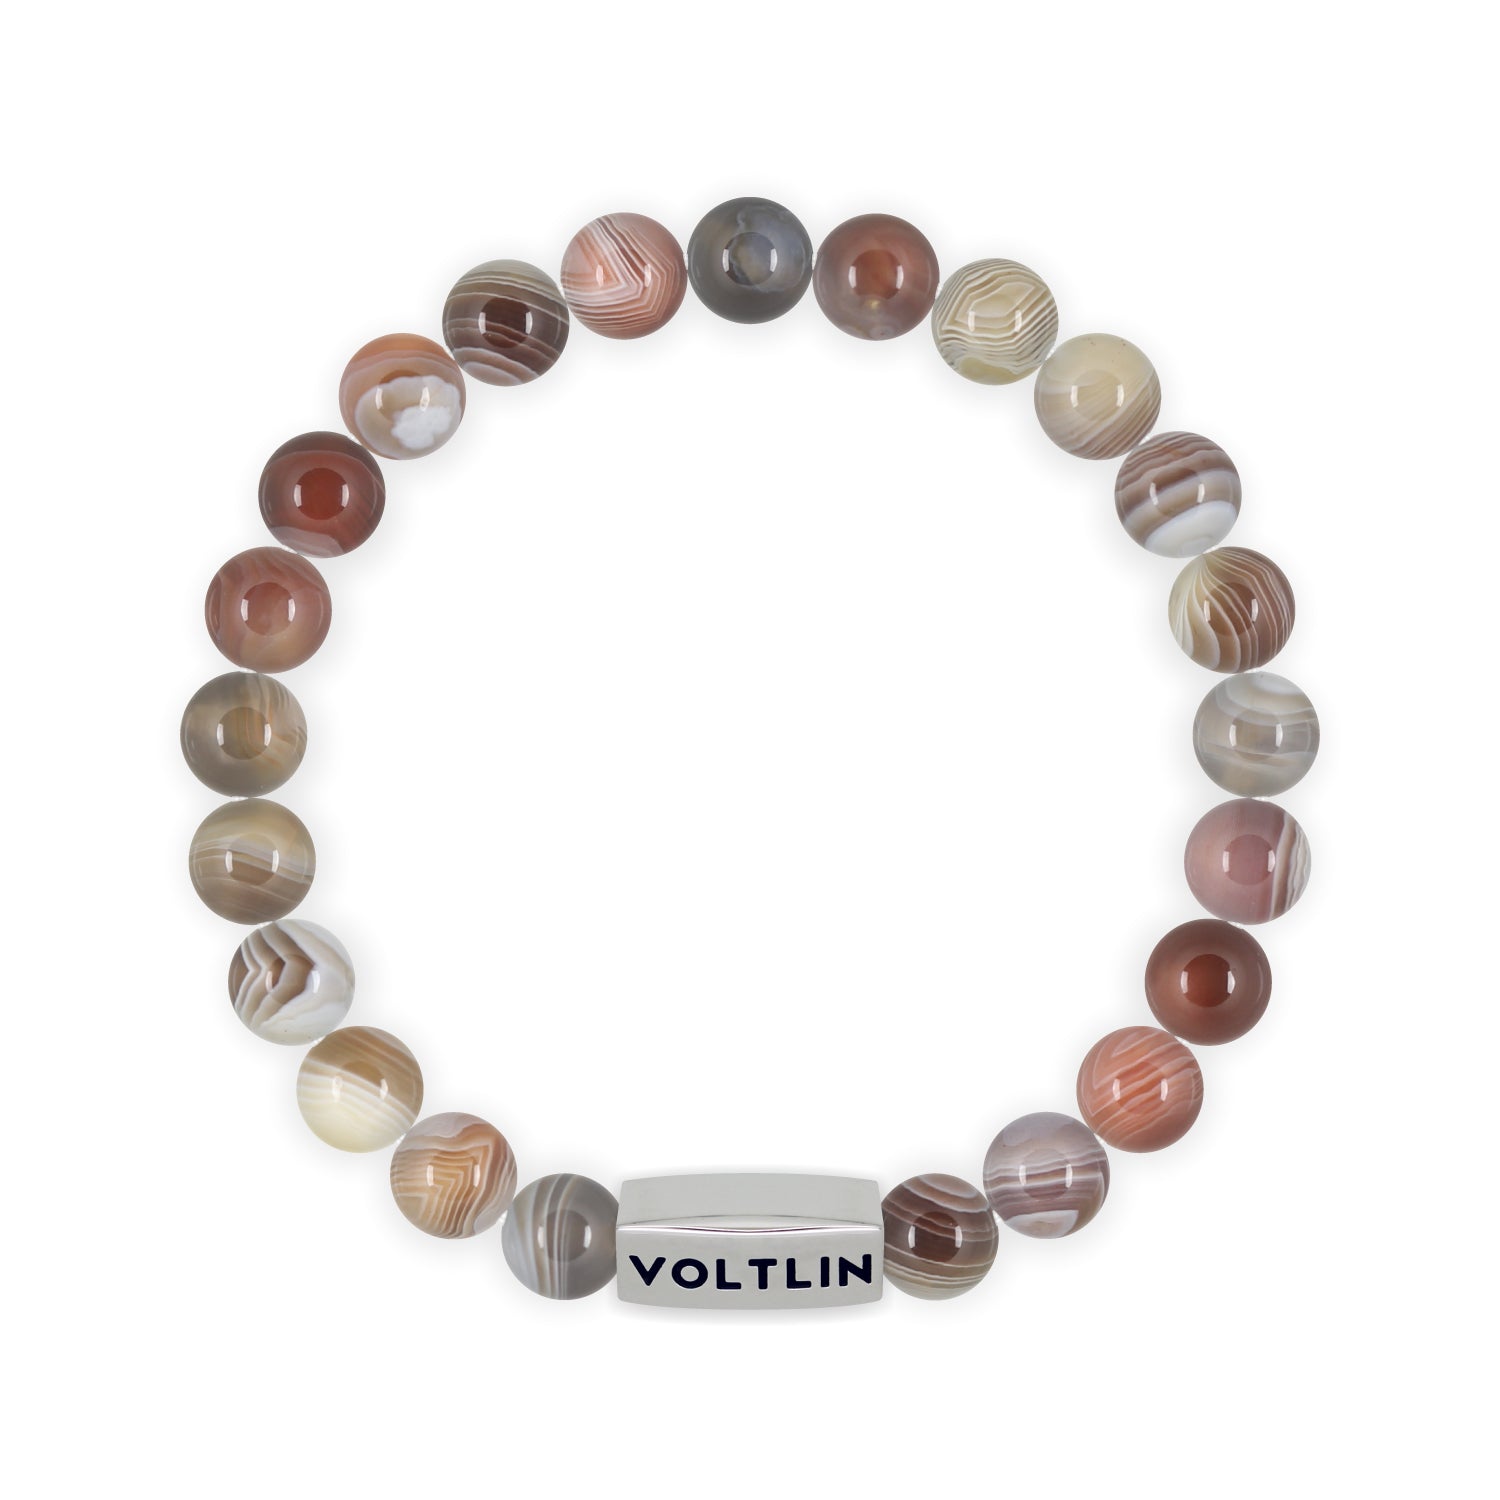 Front view of an 8mm Smooth Botswana Agate beaded stretch bracelet with silver stainless steel logo bead made by Voltlin